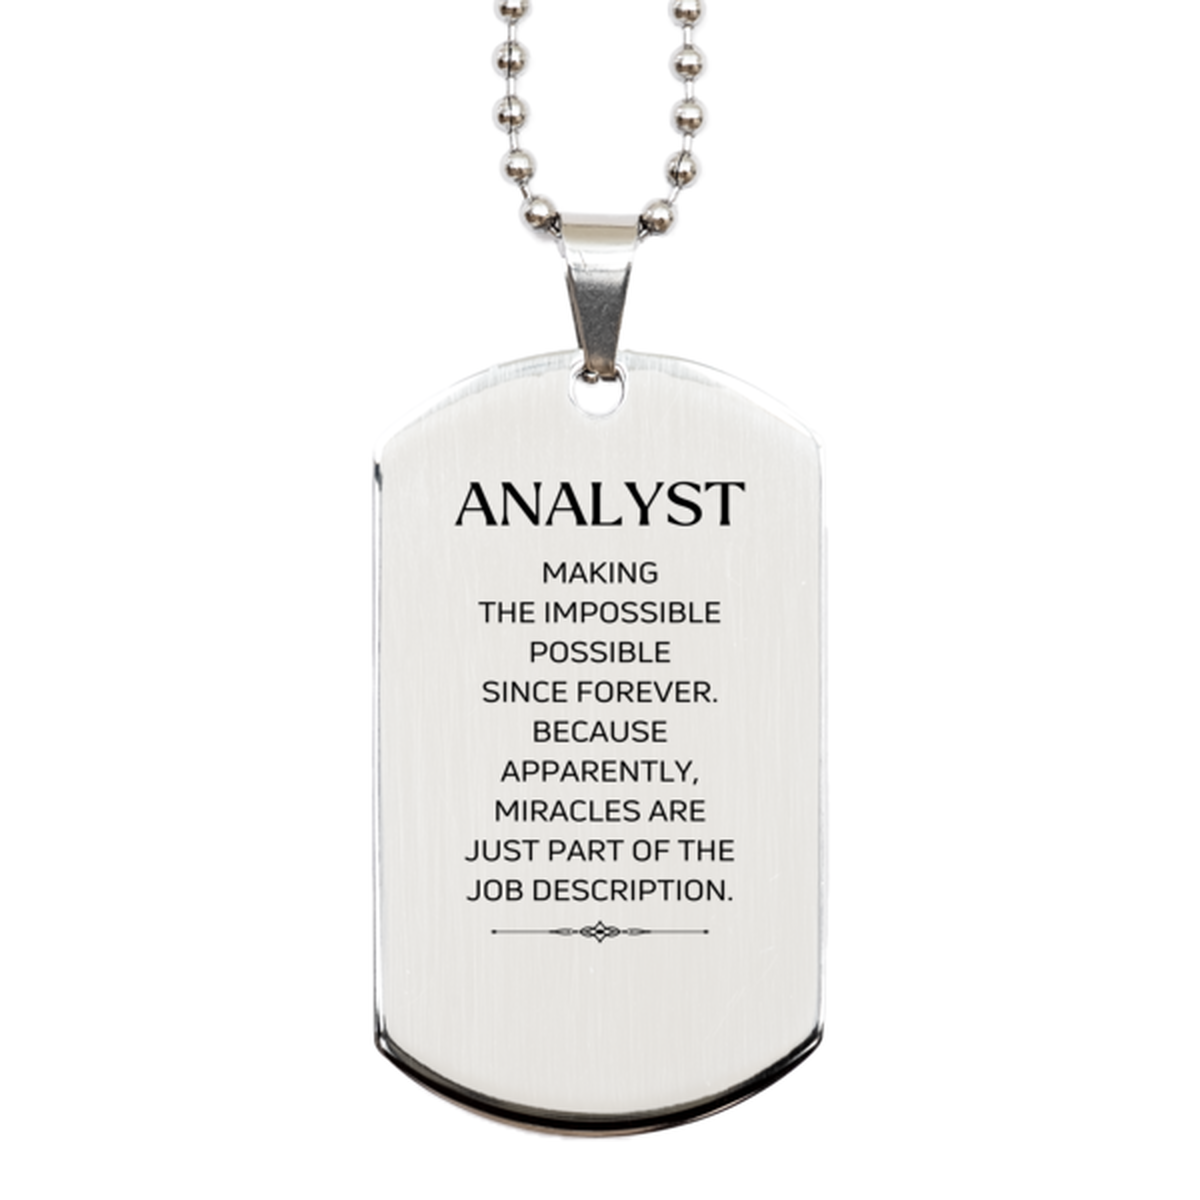 Funny Analyst Gifts, Miracles are just part of the job description, Inspirational Birthday Silver Dog Tag For Analyst, Men, Women, Coworkers, Friends, Boss